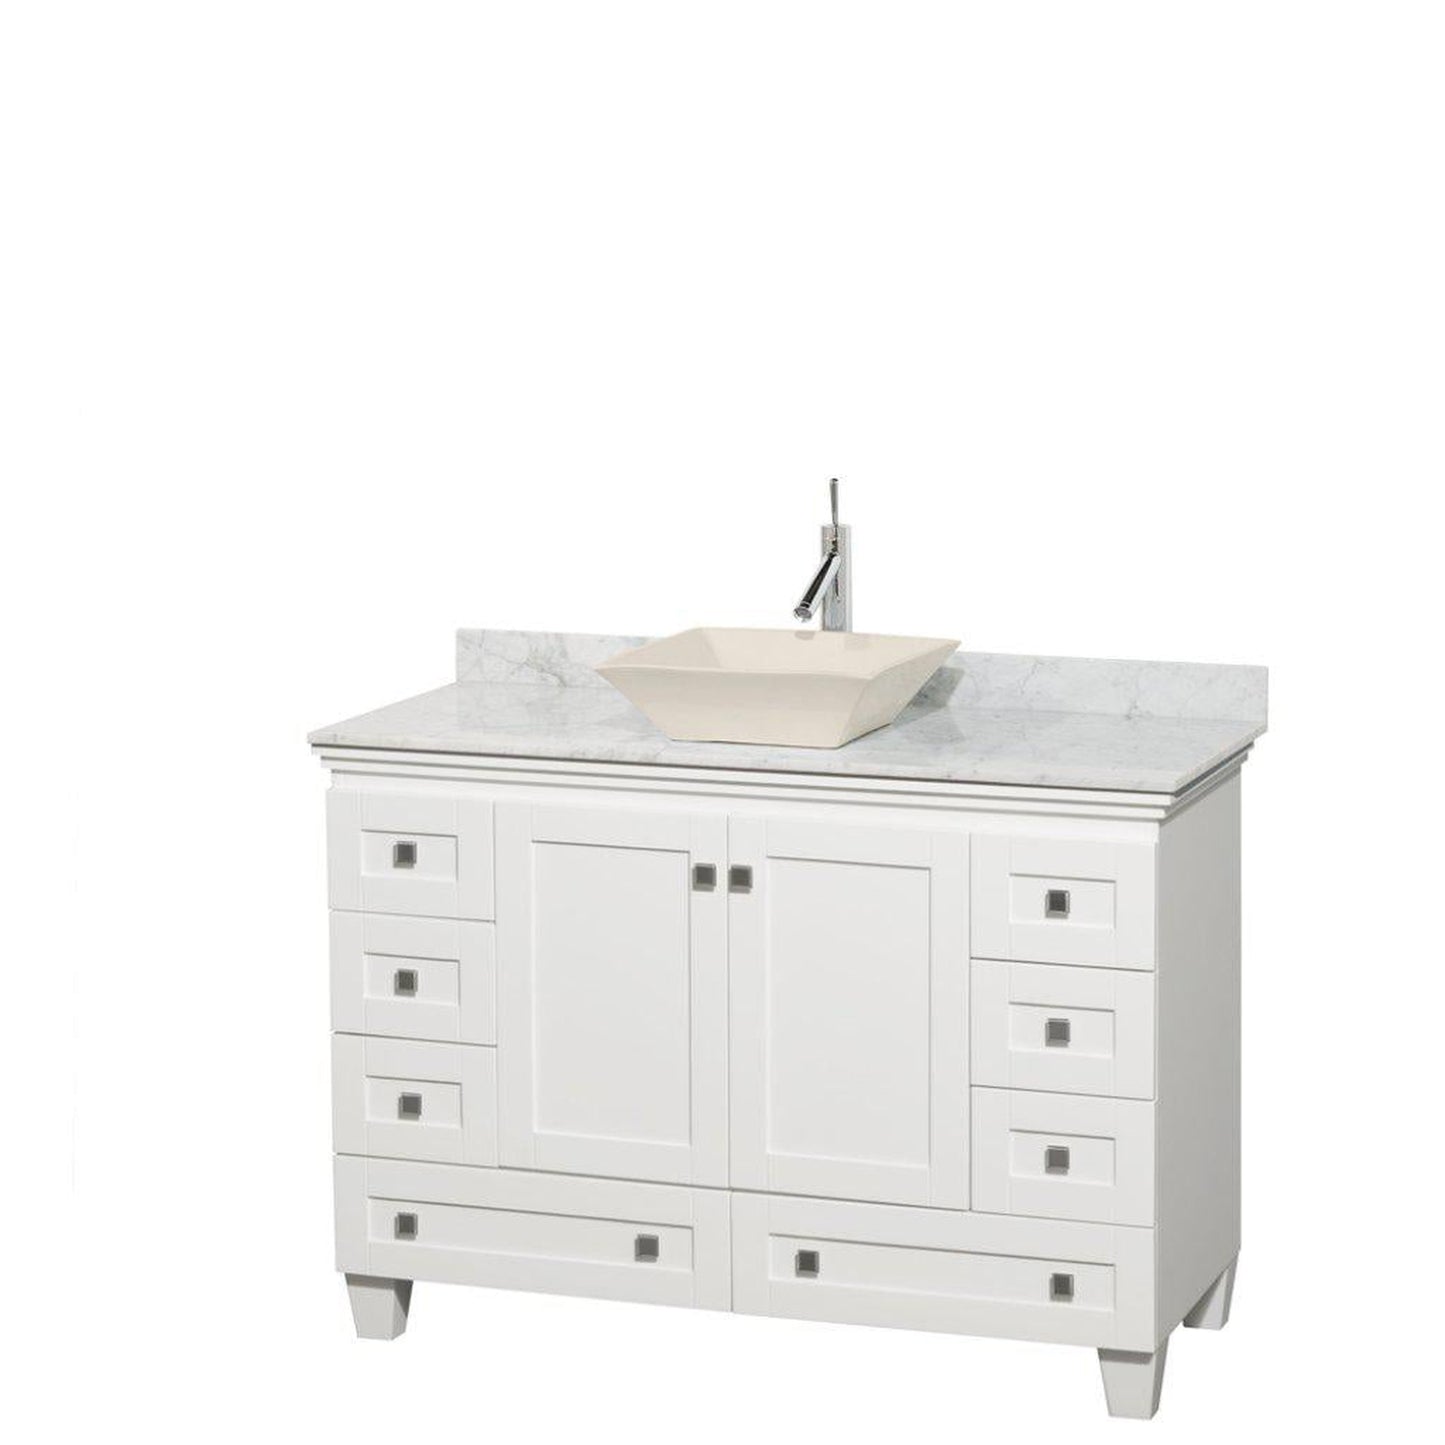 Wyndham Collection Acclaim 48" Single Bathroom White Vanity With White Carrara Marble Countertop And Pyra Bone Sink